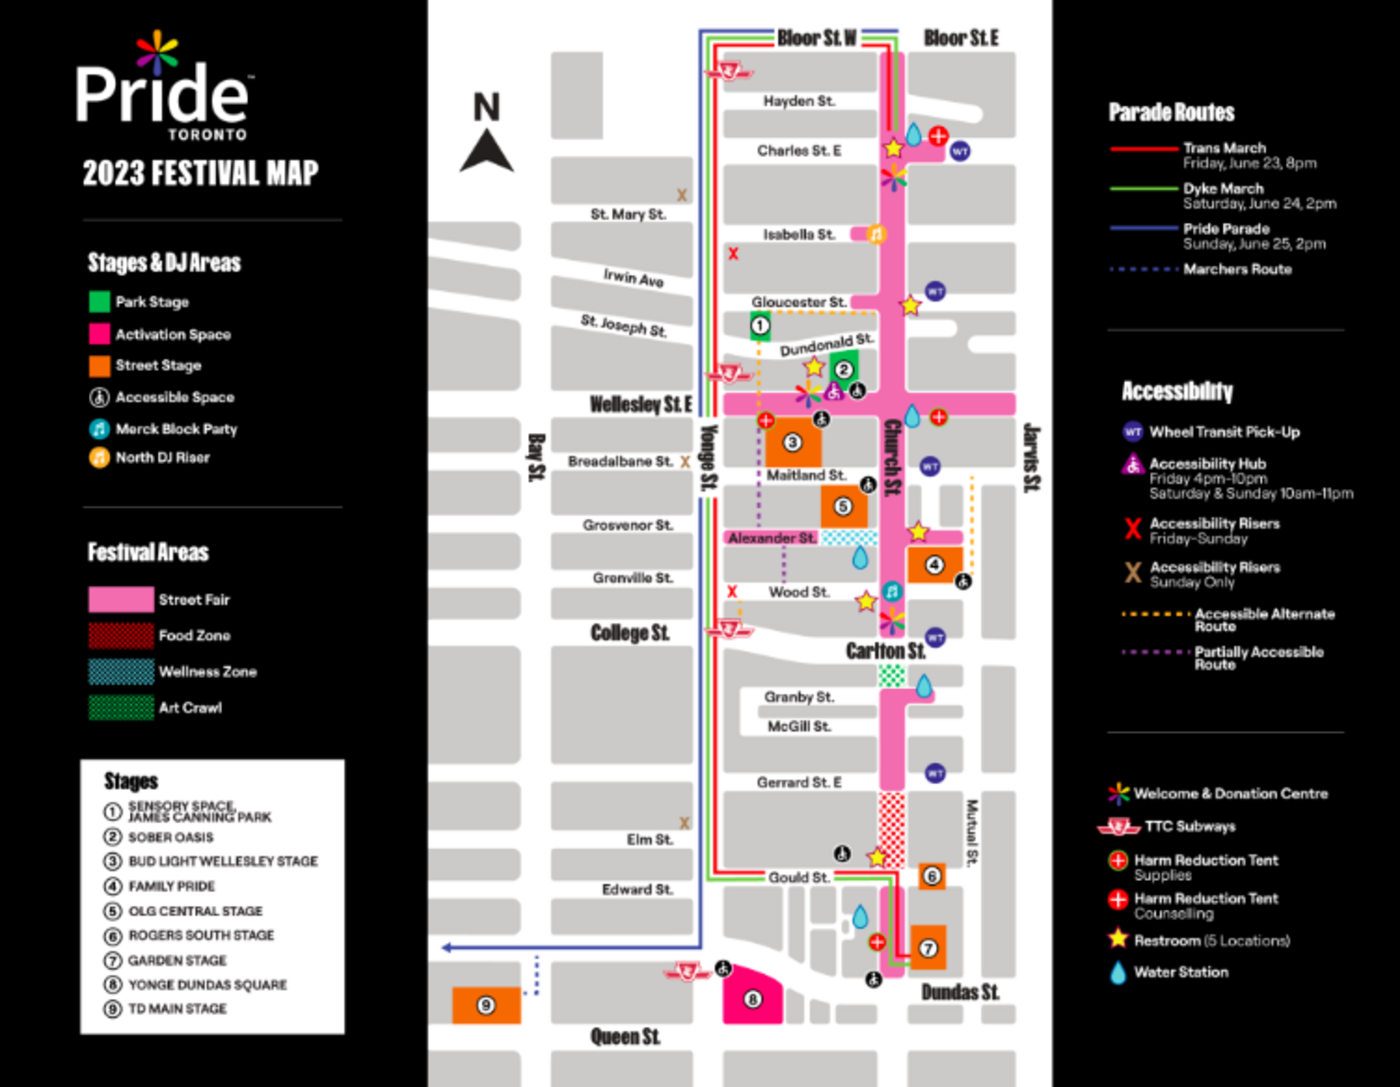 The Toronto Pride Parade route map and road closures for 2023